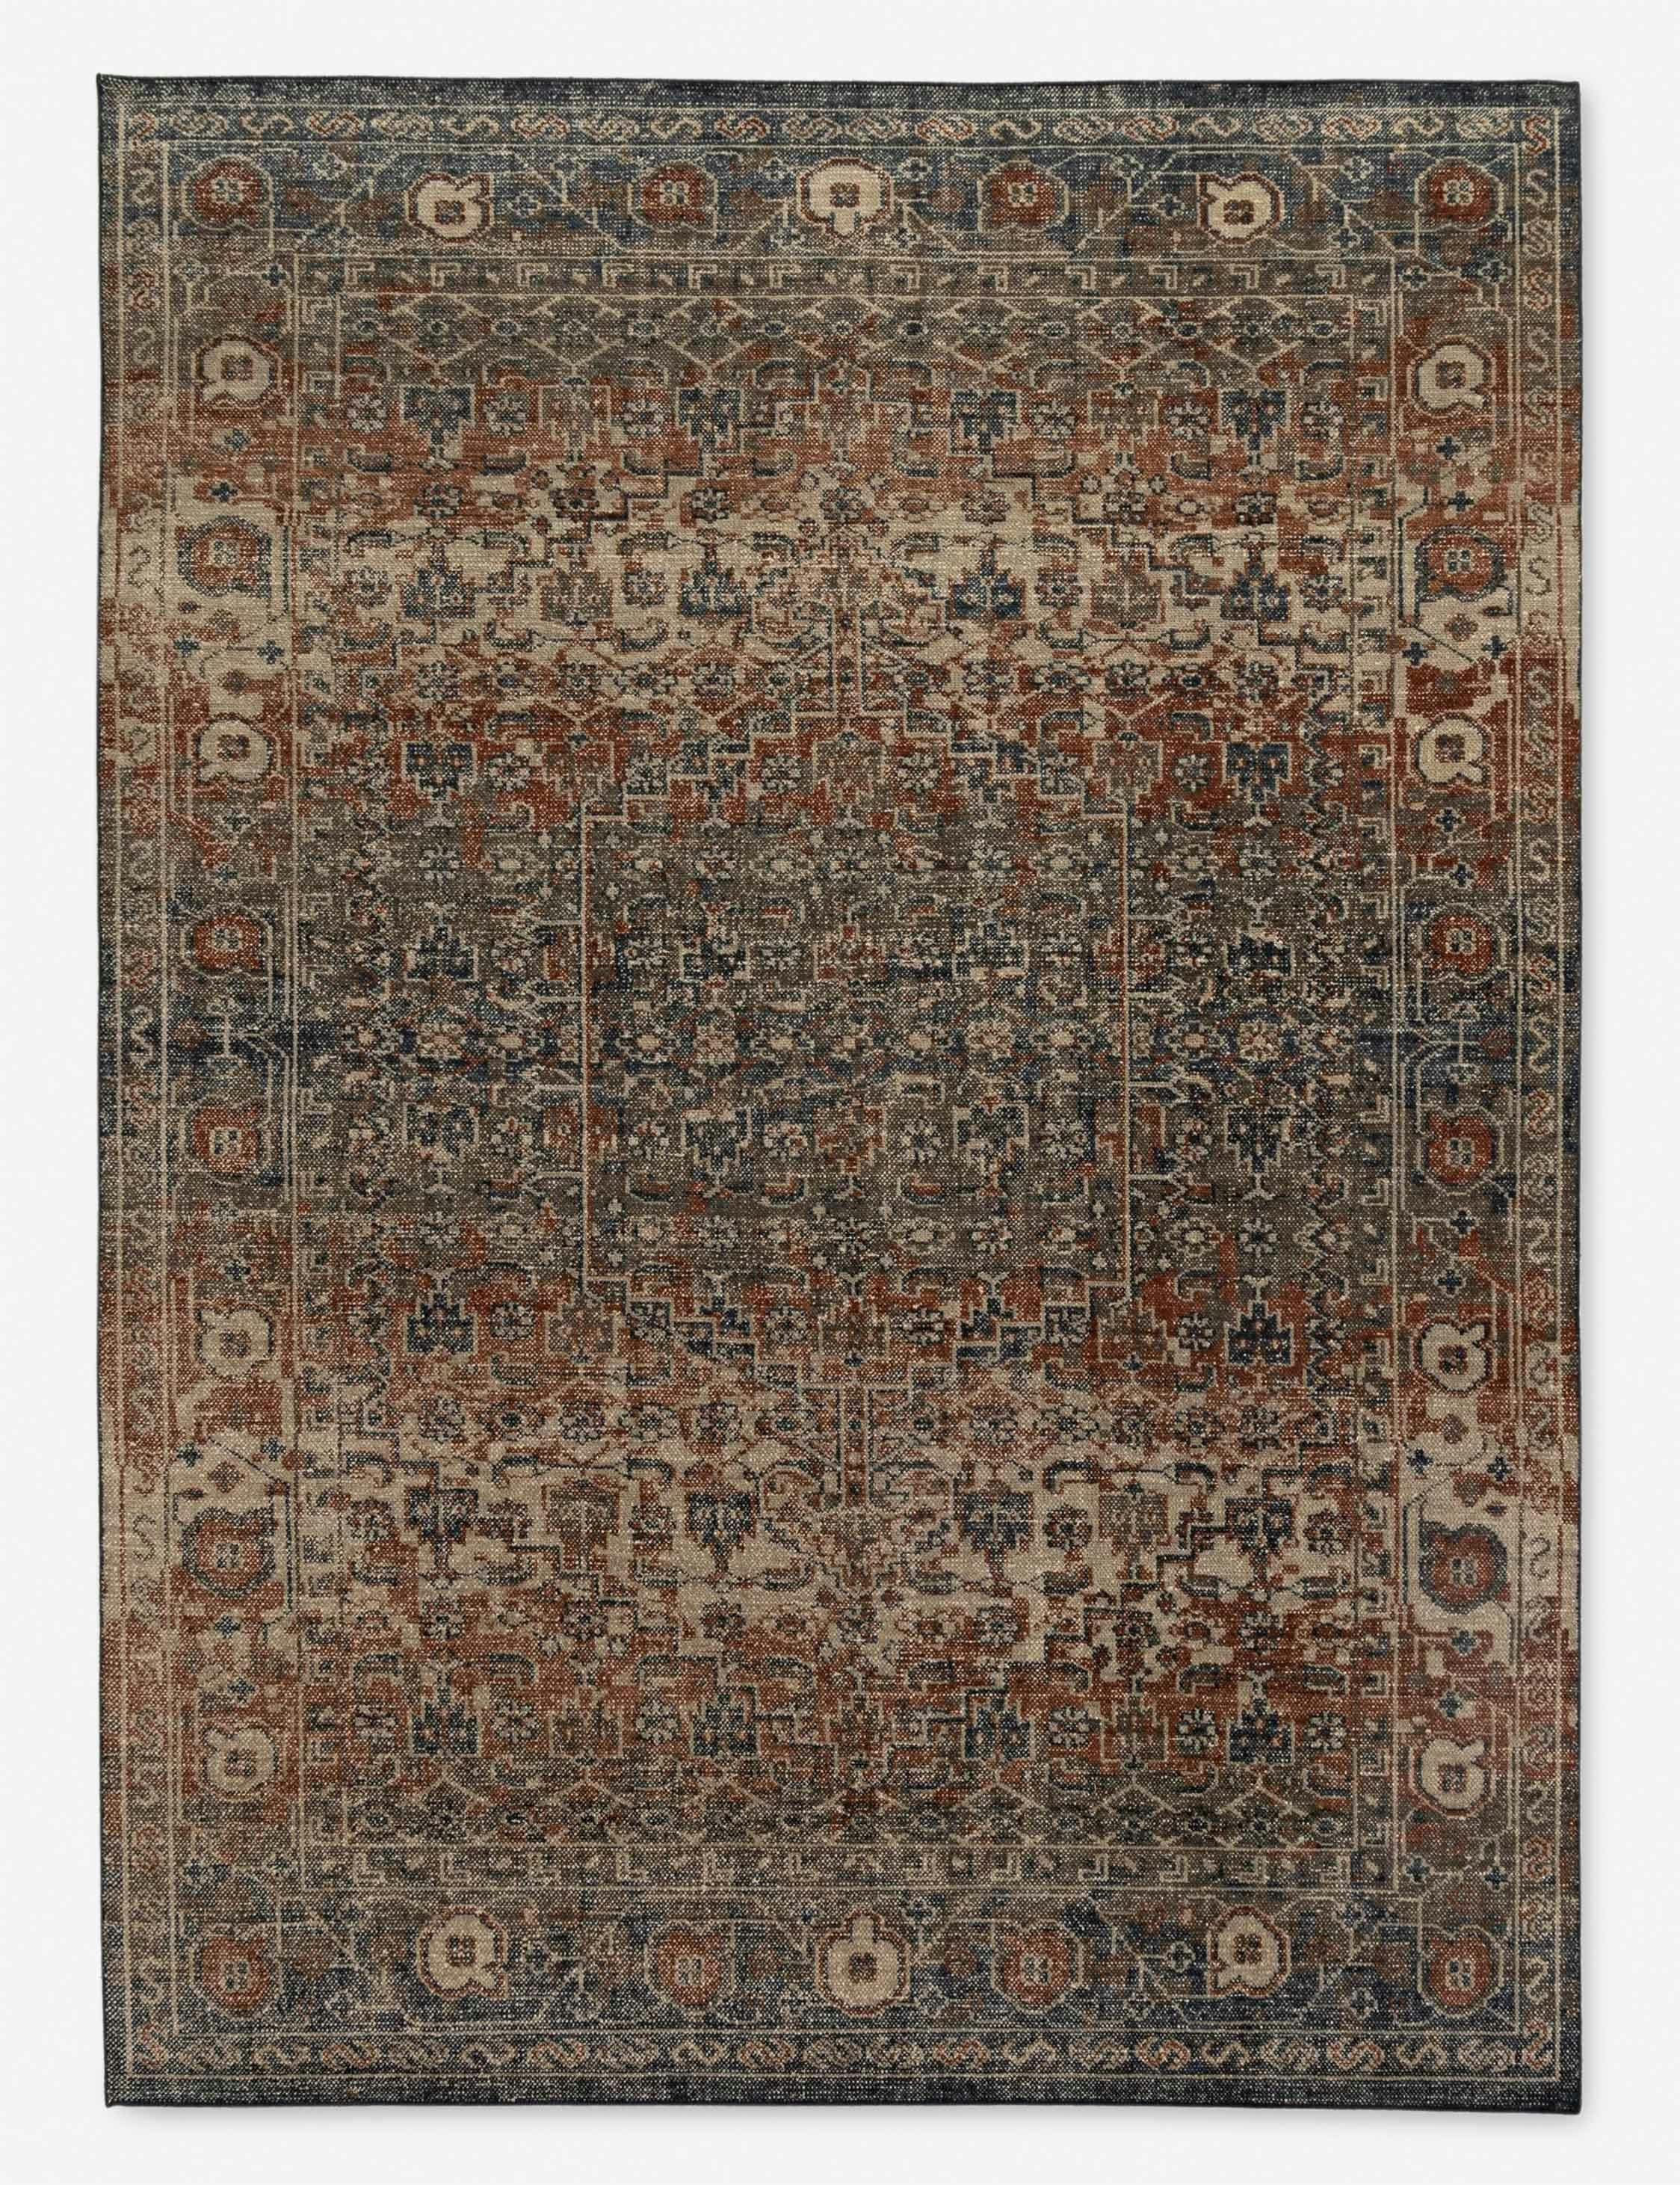 Arwen Traditional Hand-Knotted Wool Area Rug, 8' x 10', Earth Tones